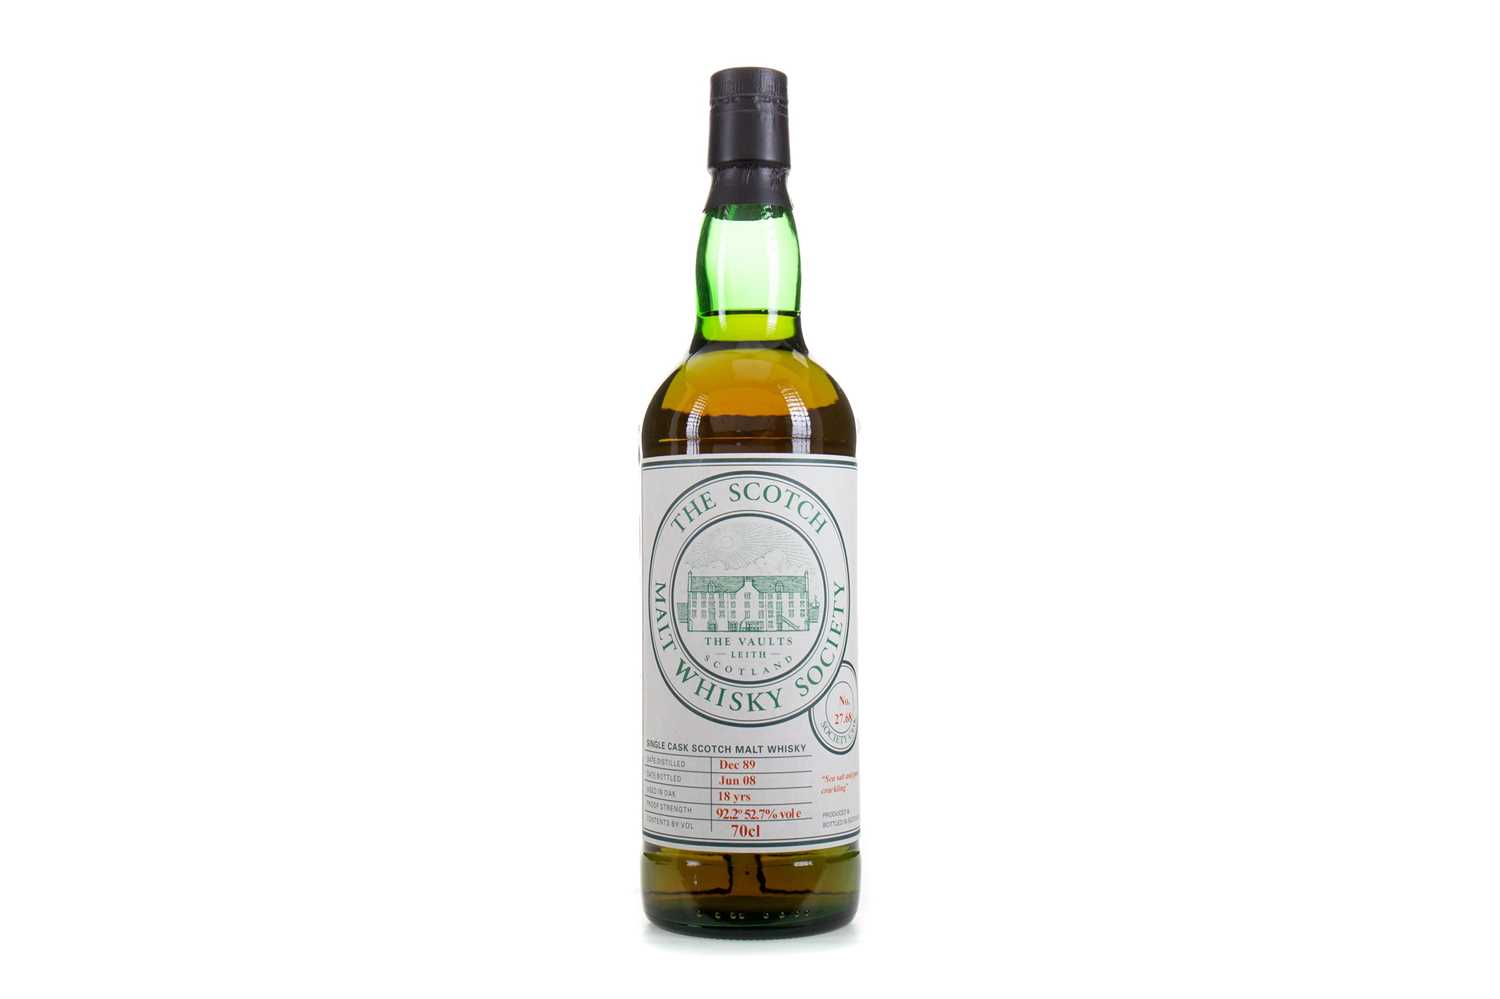 Lot 508 - SMWS 27.68 SPRINGBANK 1989 18 YEAR OLD